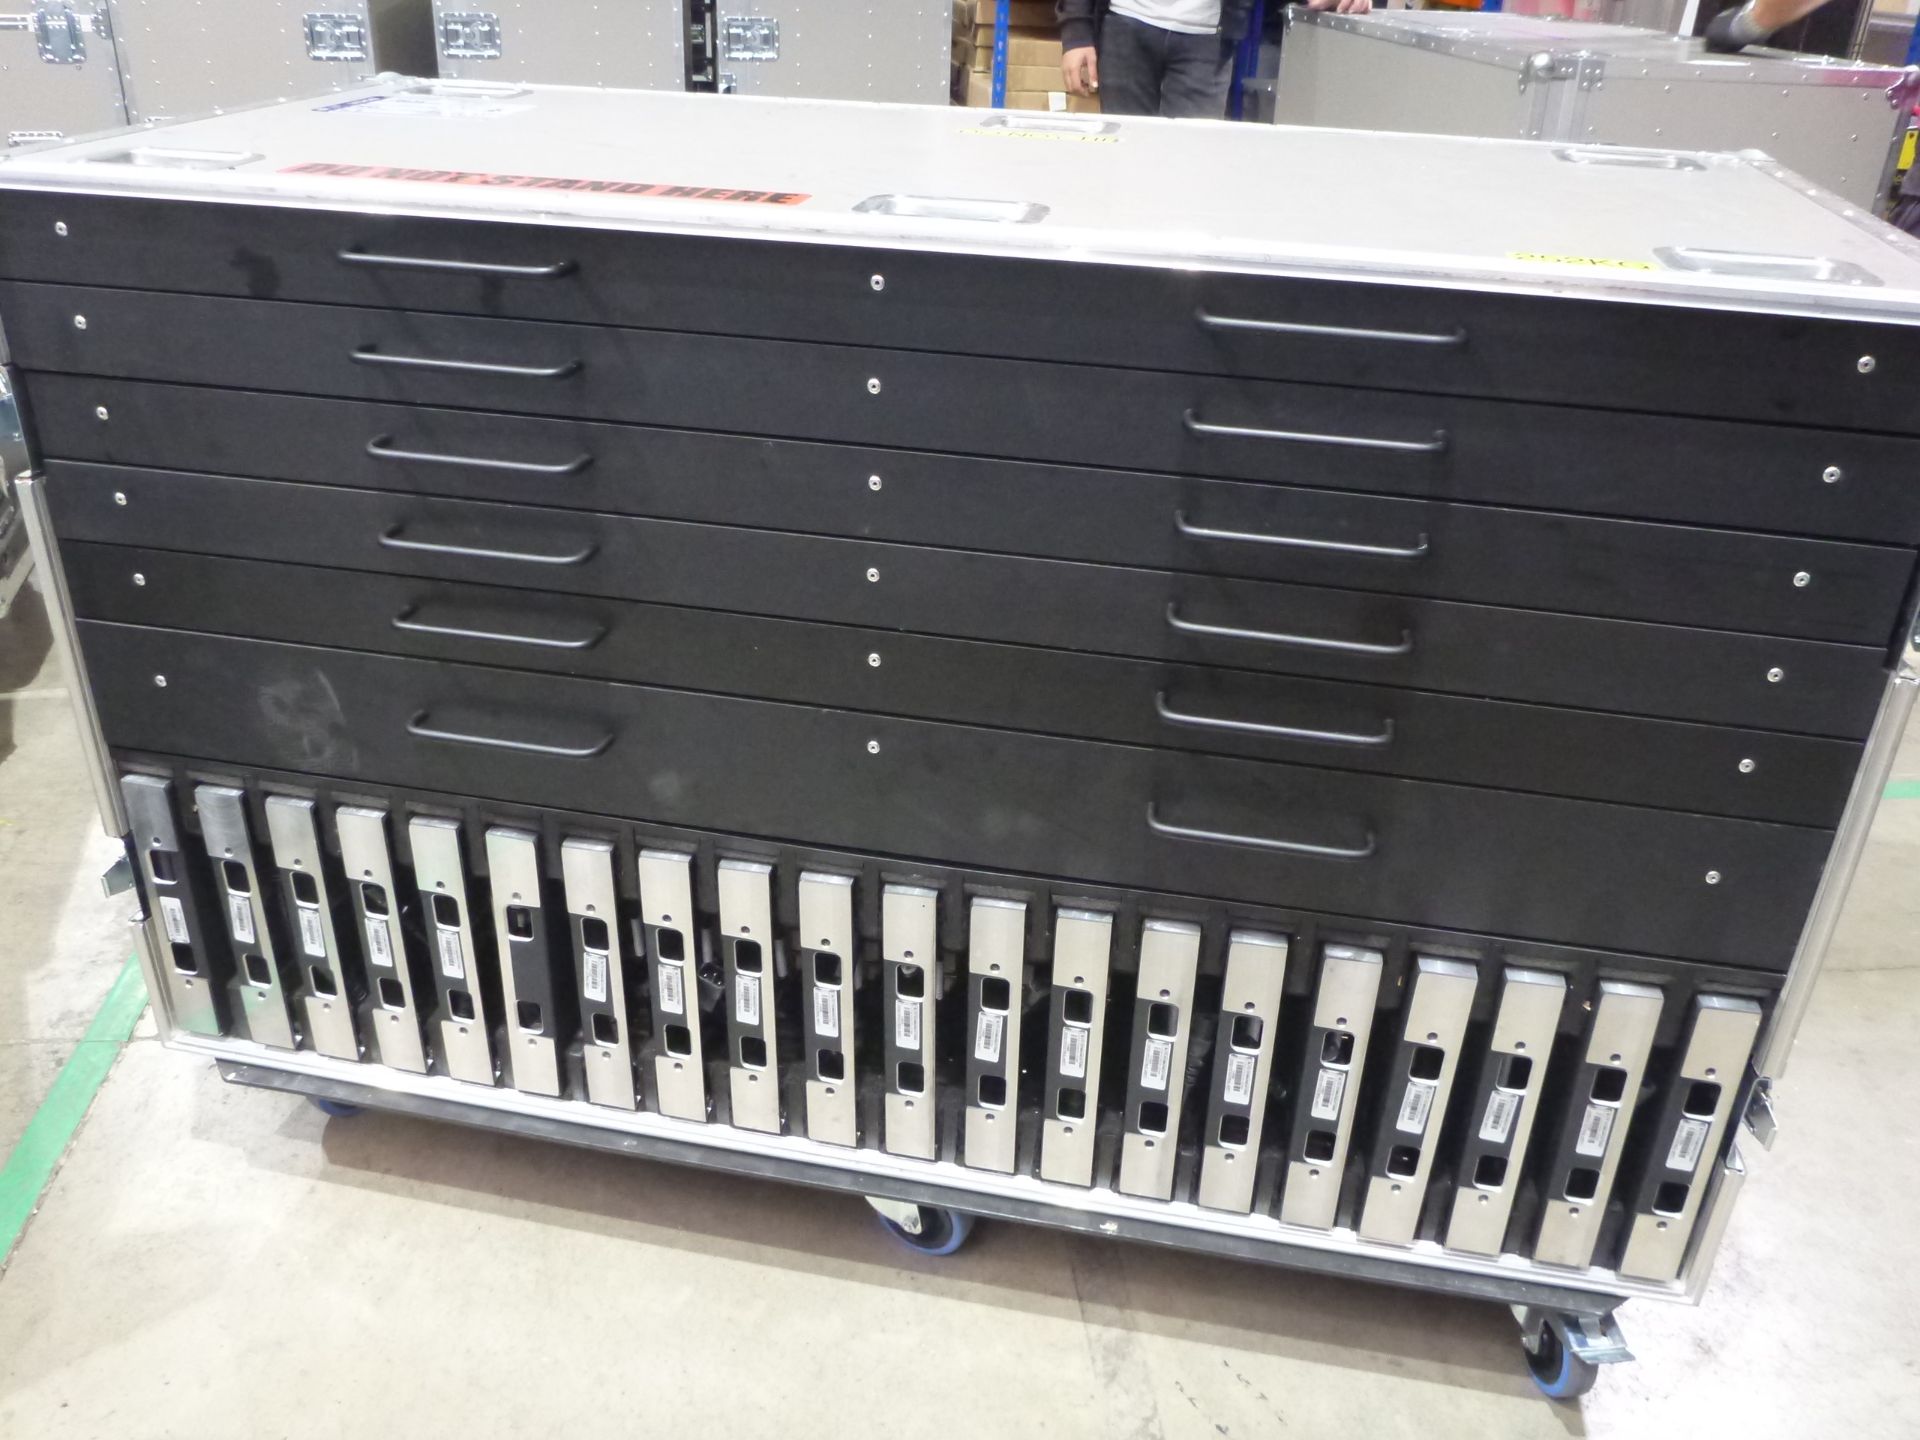 DigiLED DigiTHIN HD 2080 LED Chassis and LED Modules, 20 off chassis with 40 off LED modules, In